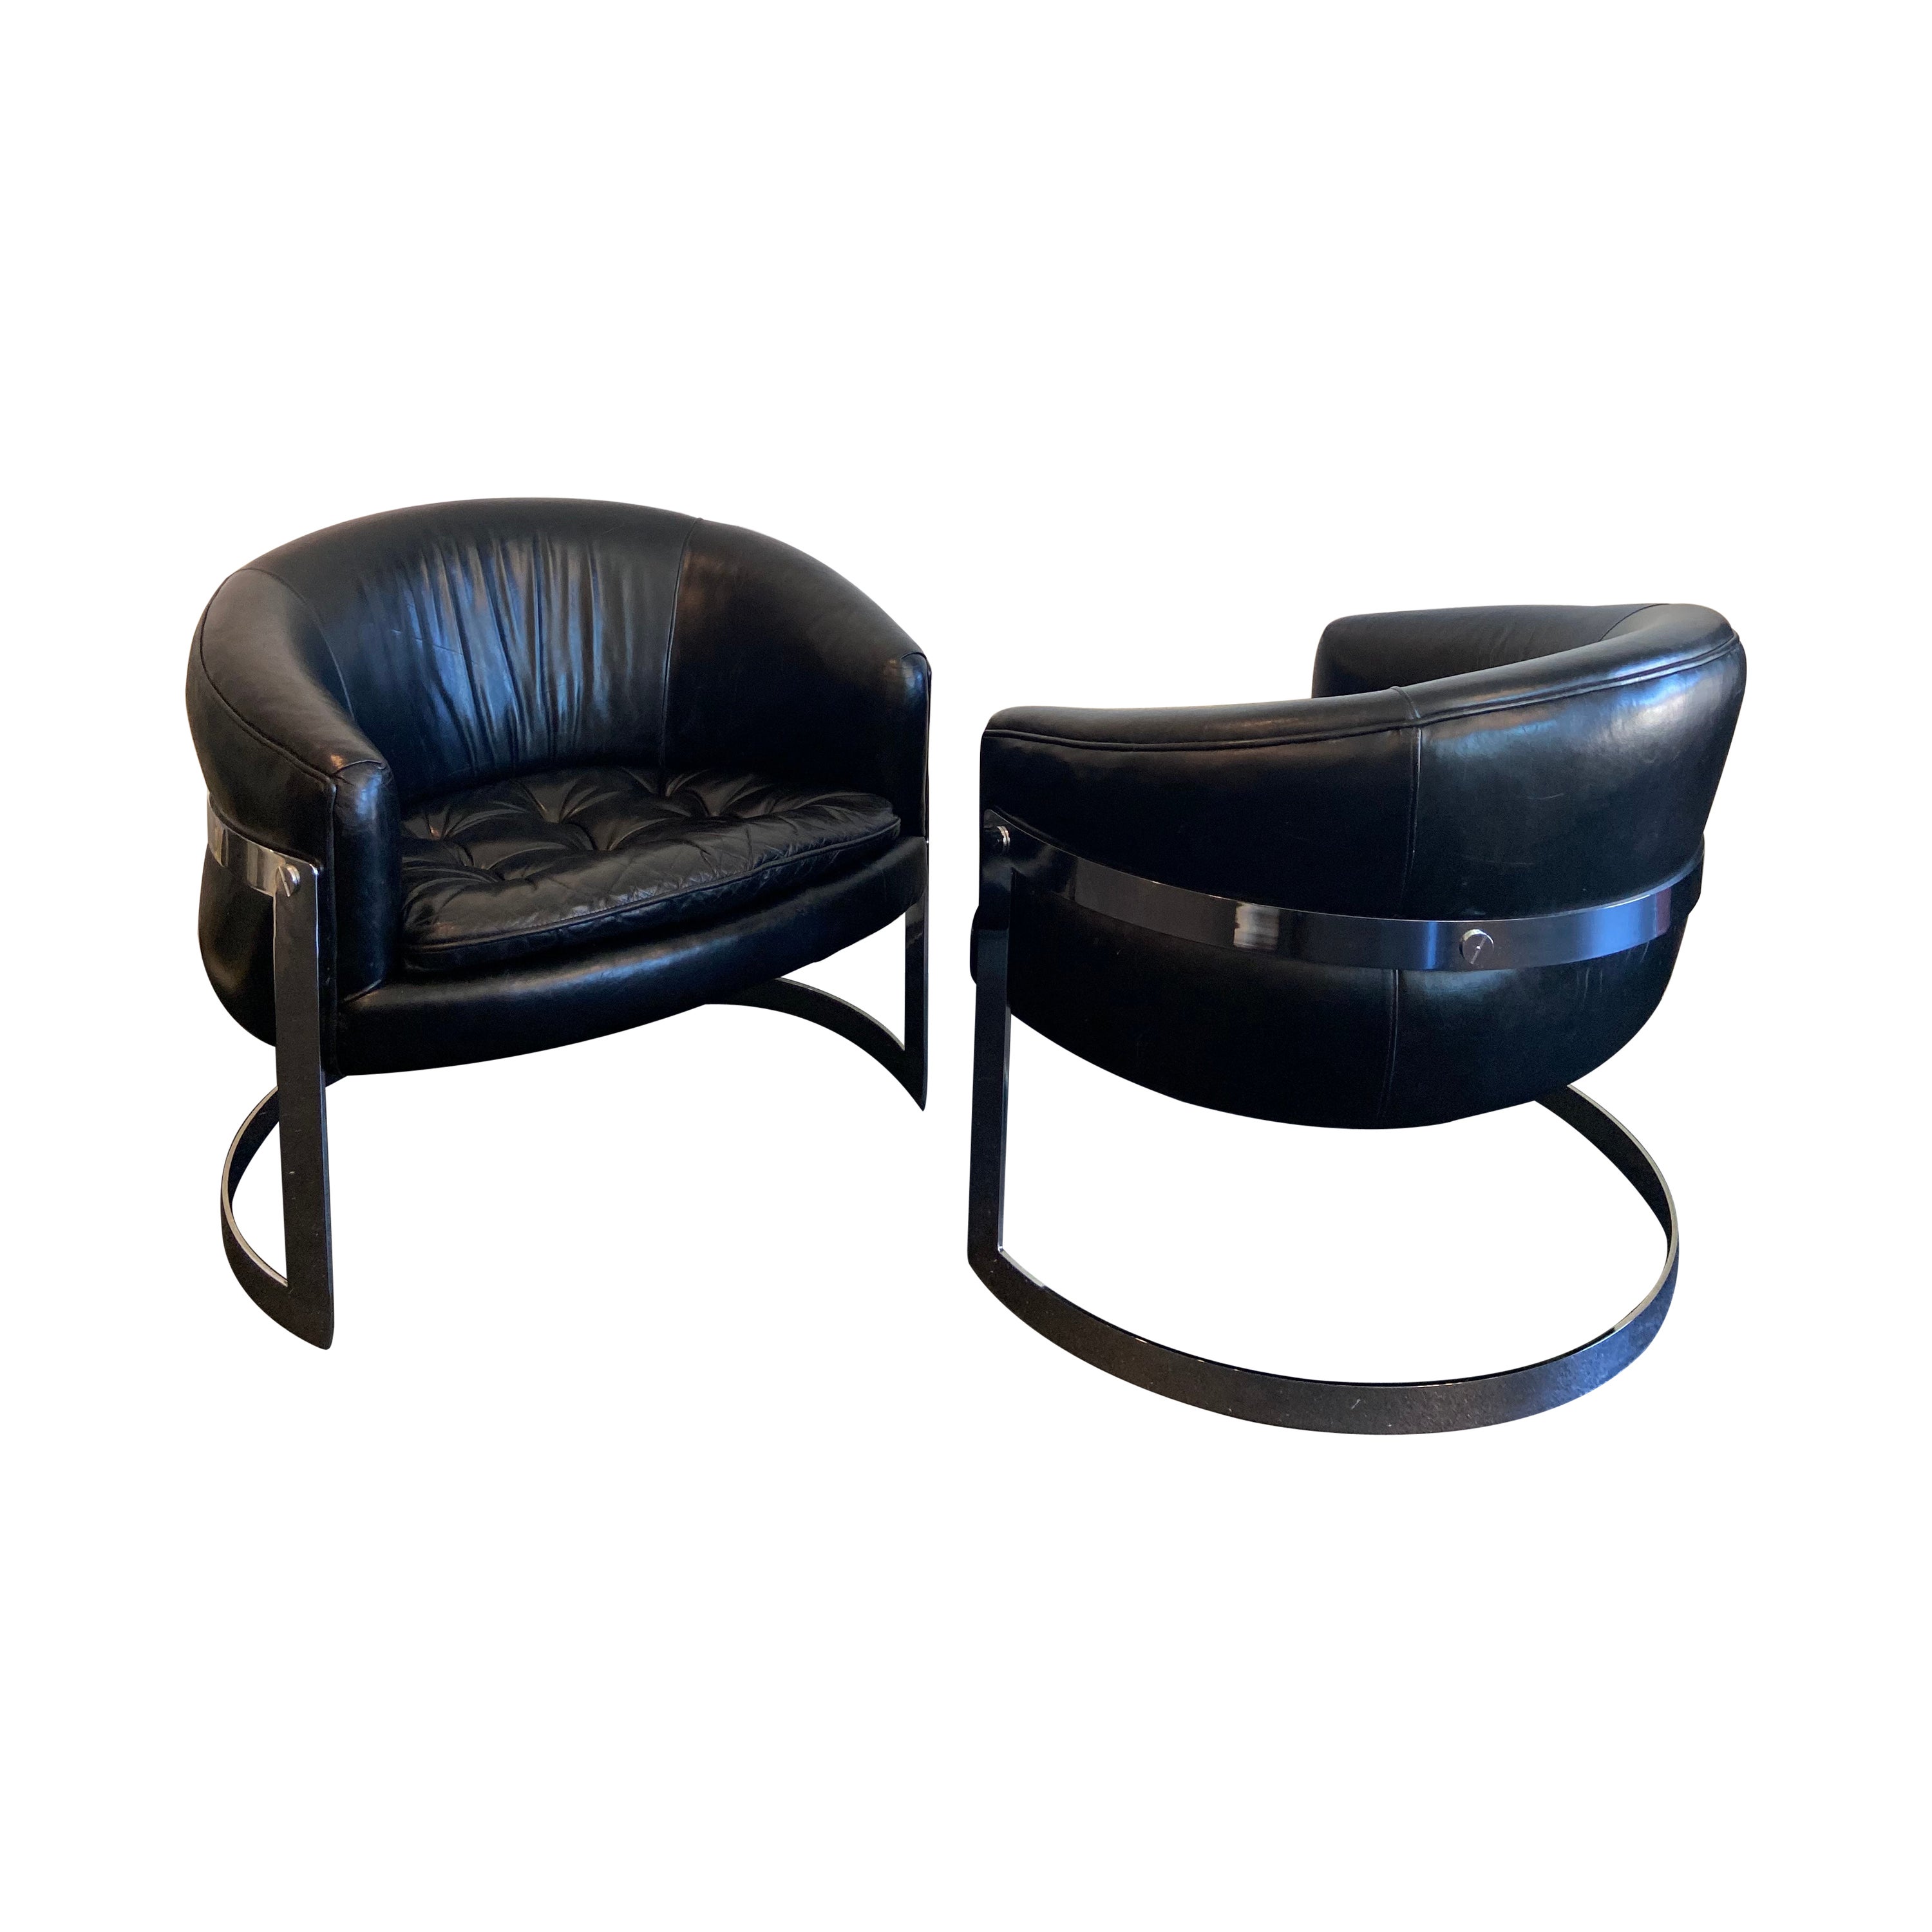 Flair Milo Baughman Style Chrome Cantilever Lounge Chairs In Leather- a Pair